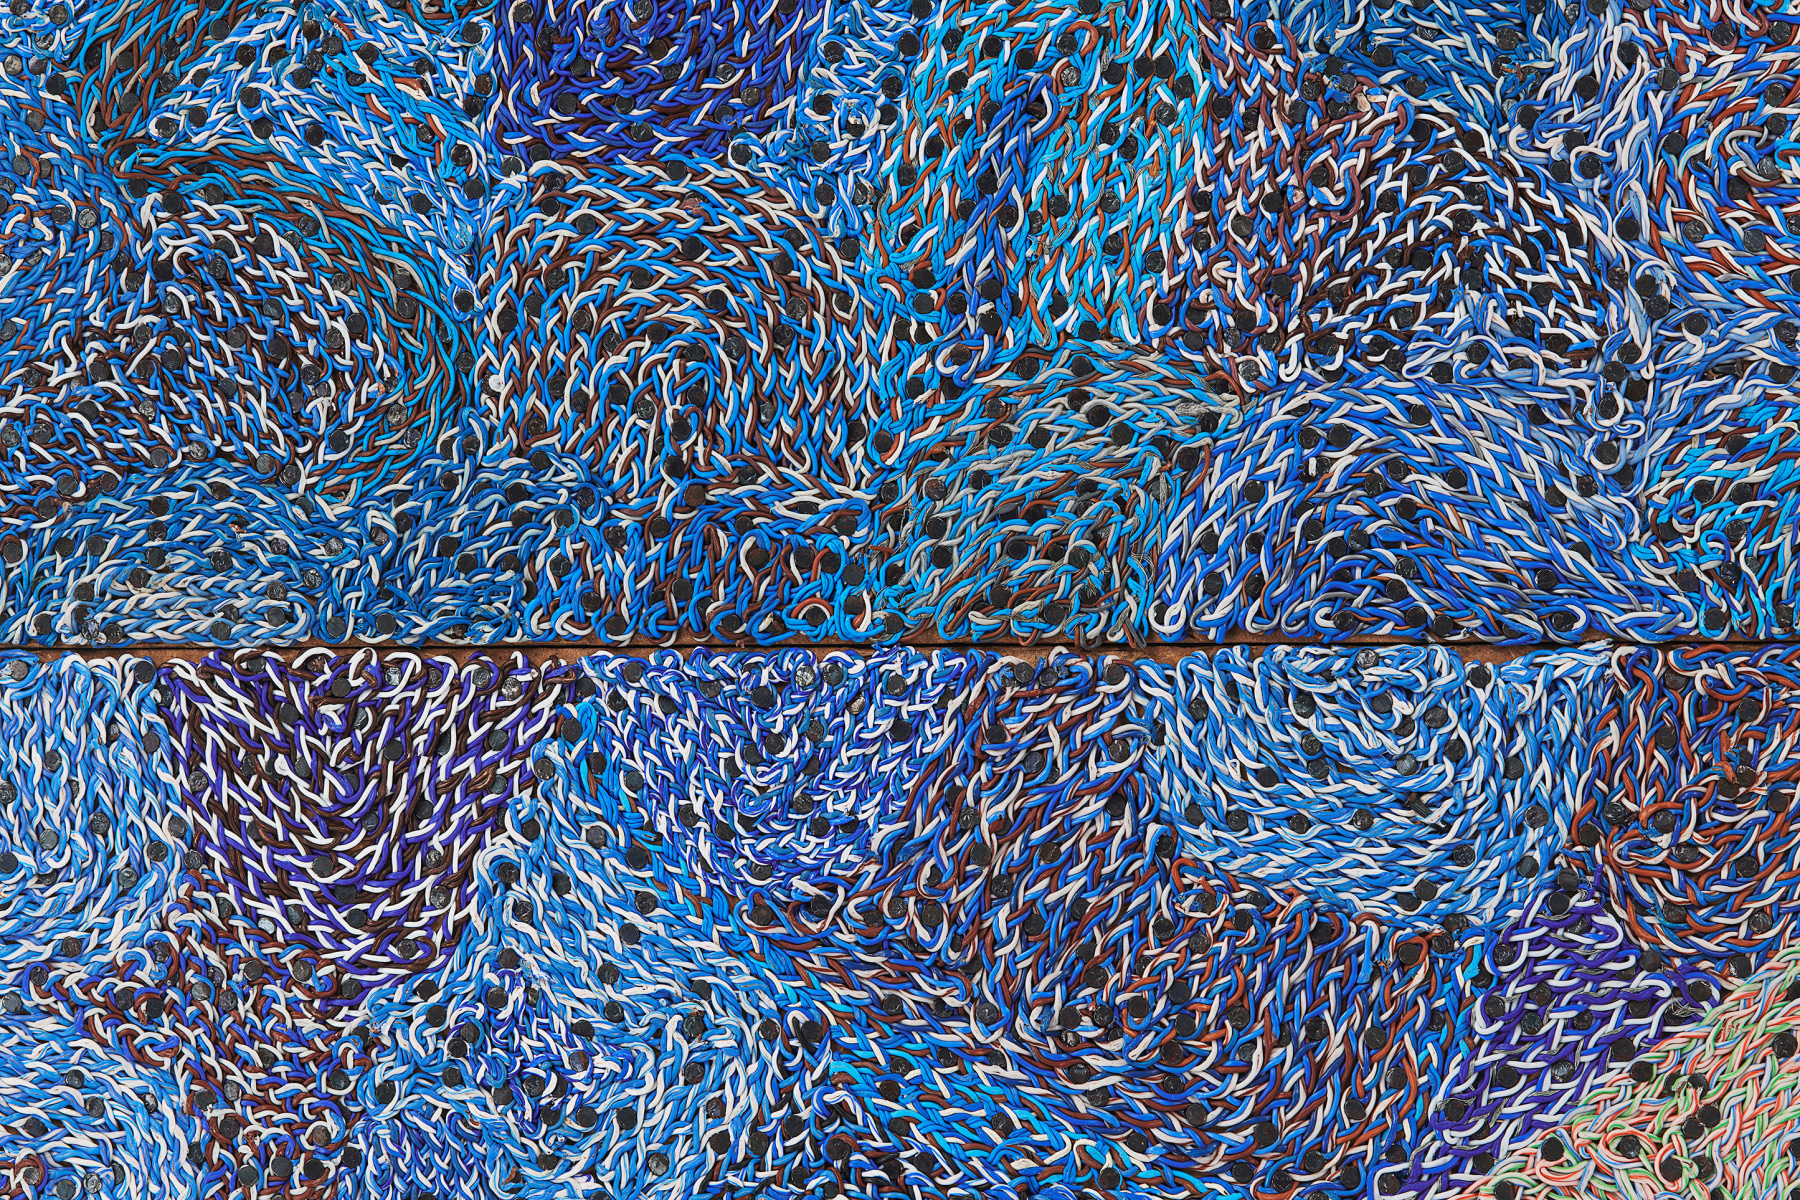 woven electrical wiring creating a blue, swirling, dotted surface